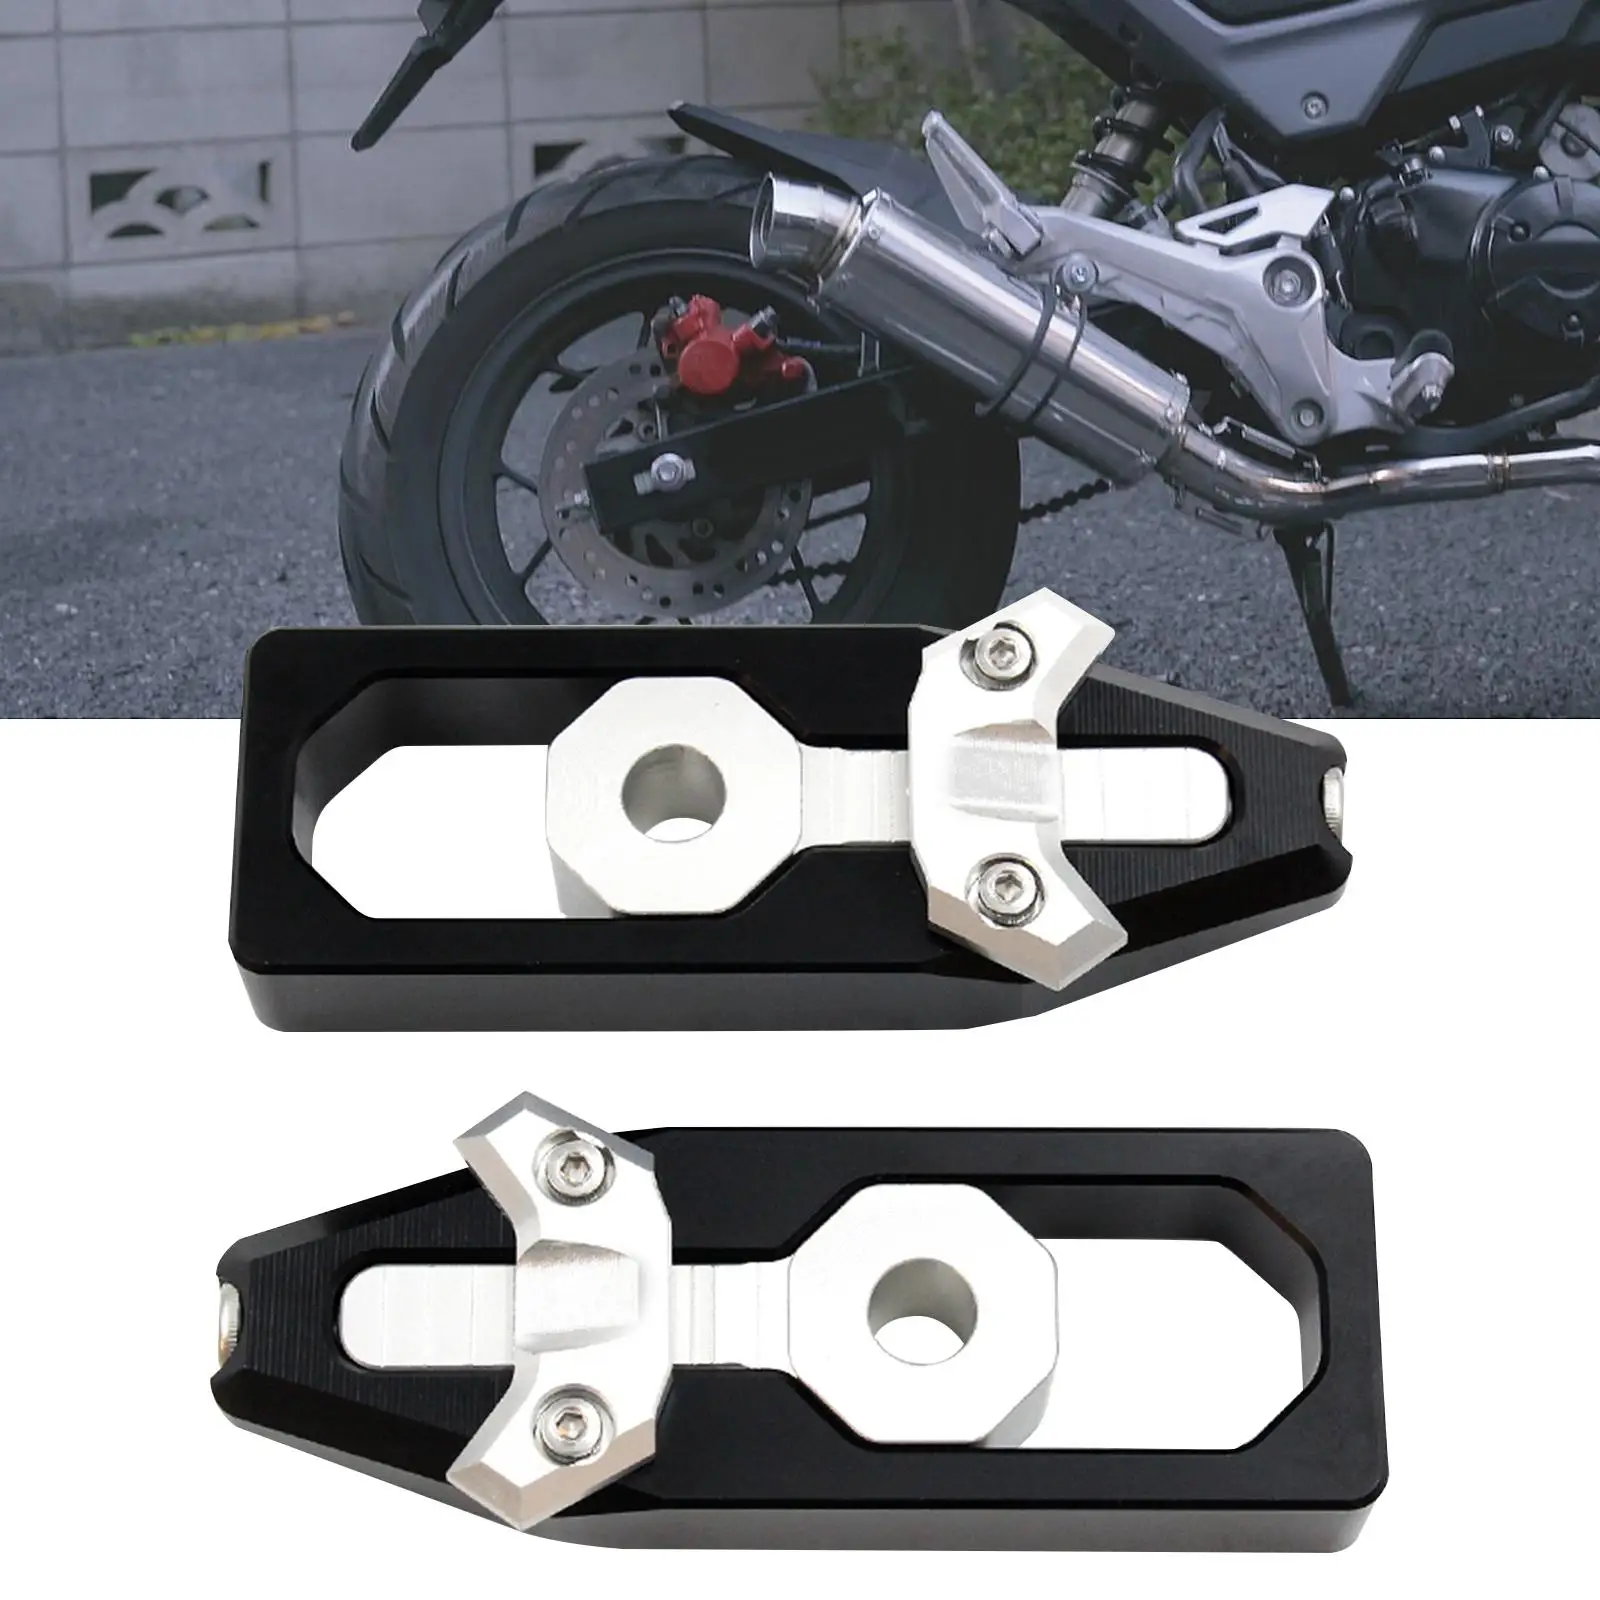 2x Chain Tensioner High Performance Easy to Install Professional Chain Adjuster